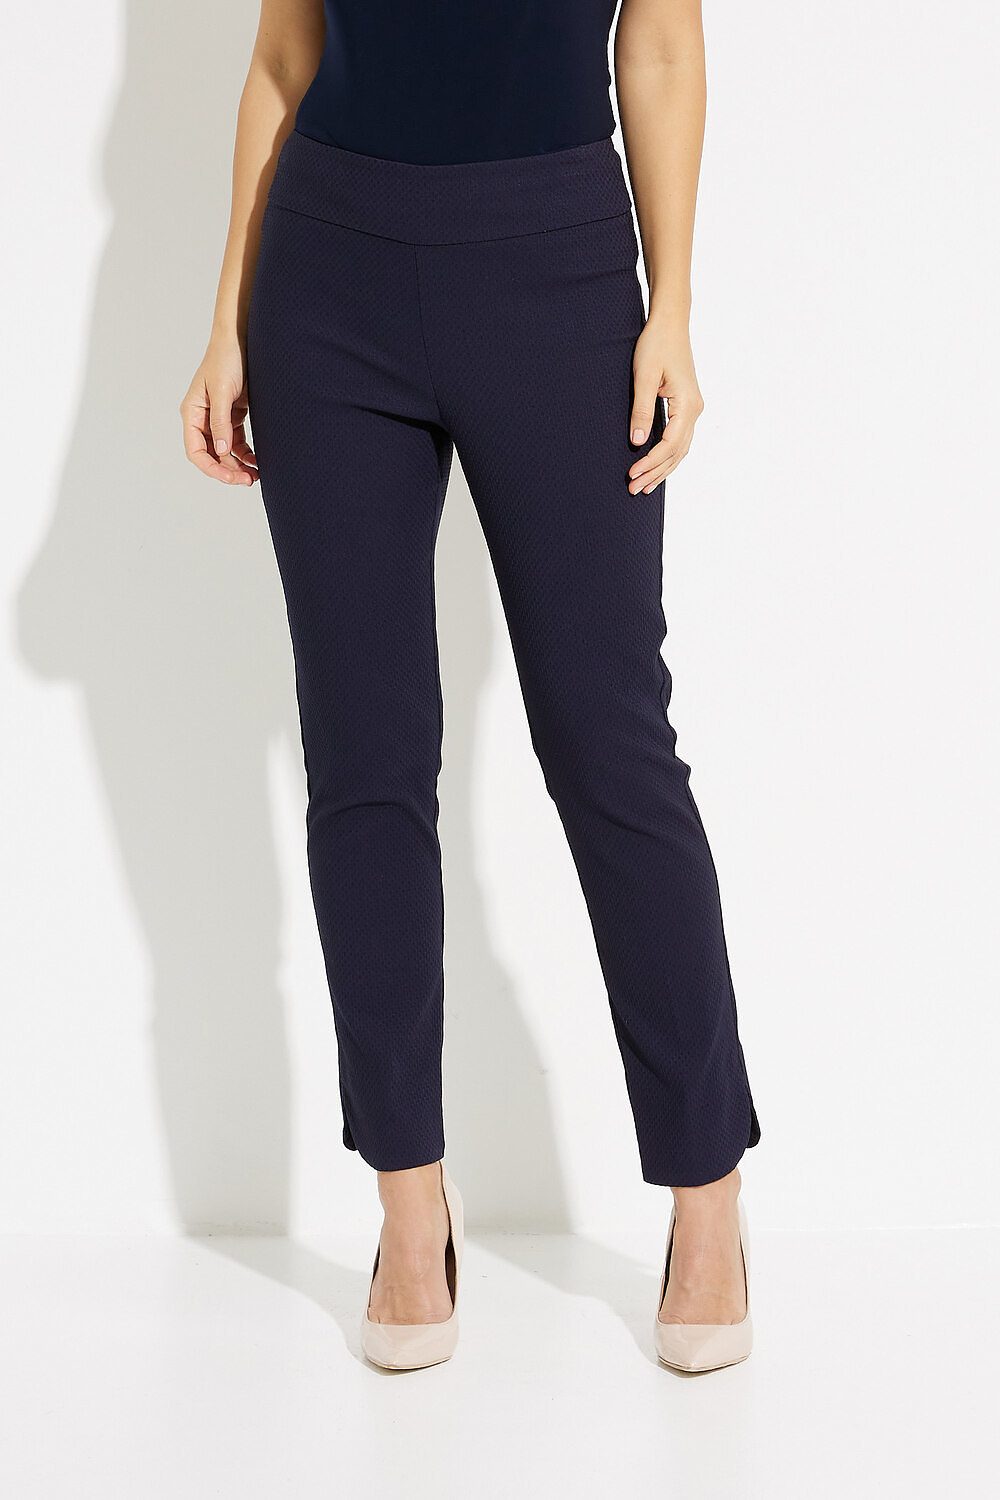 Contour Waistband Cropped Pants Style 231220. Midnight Blue